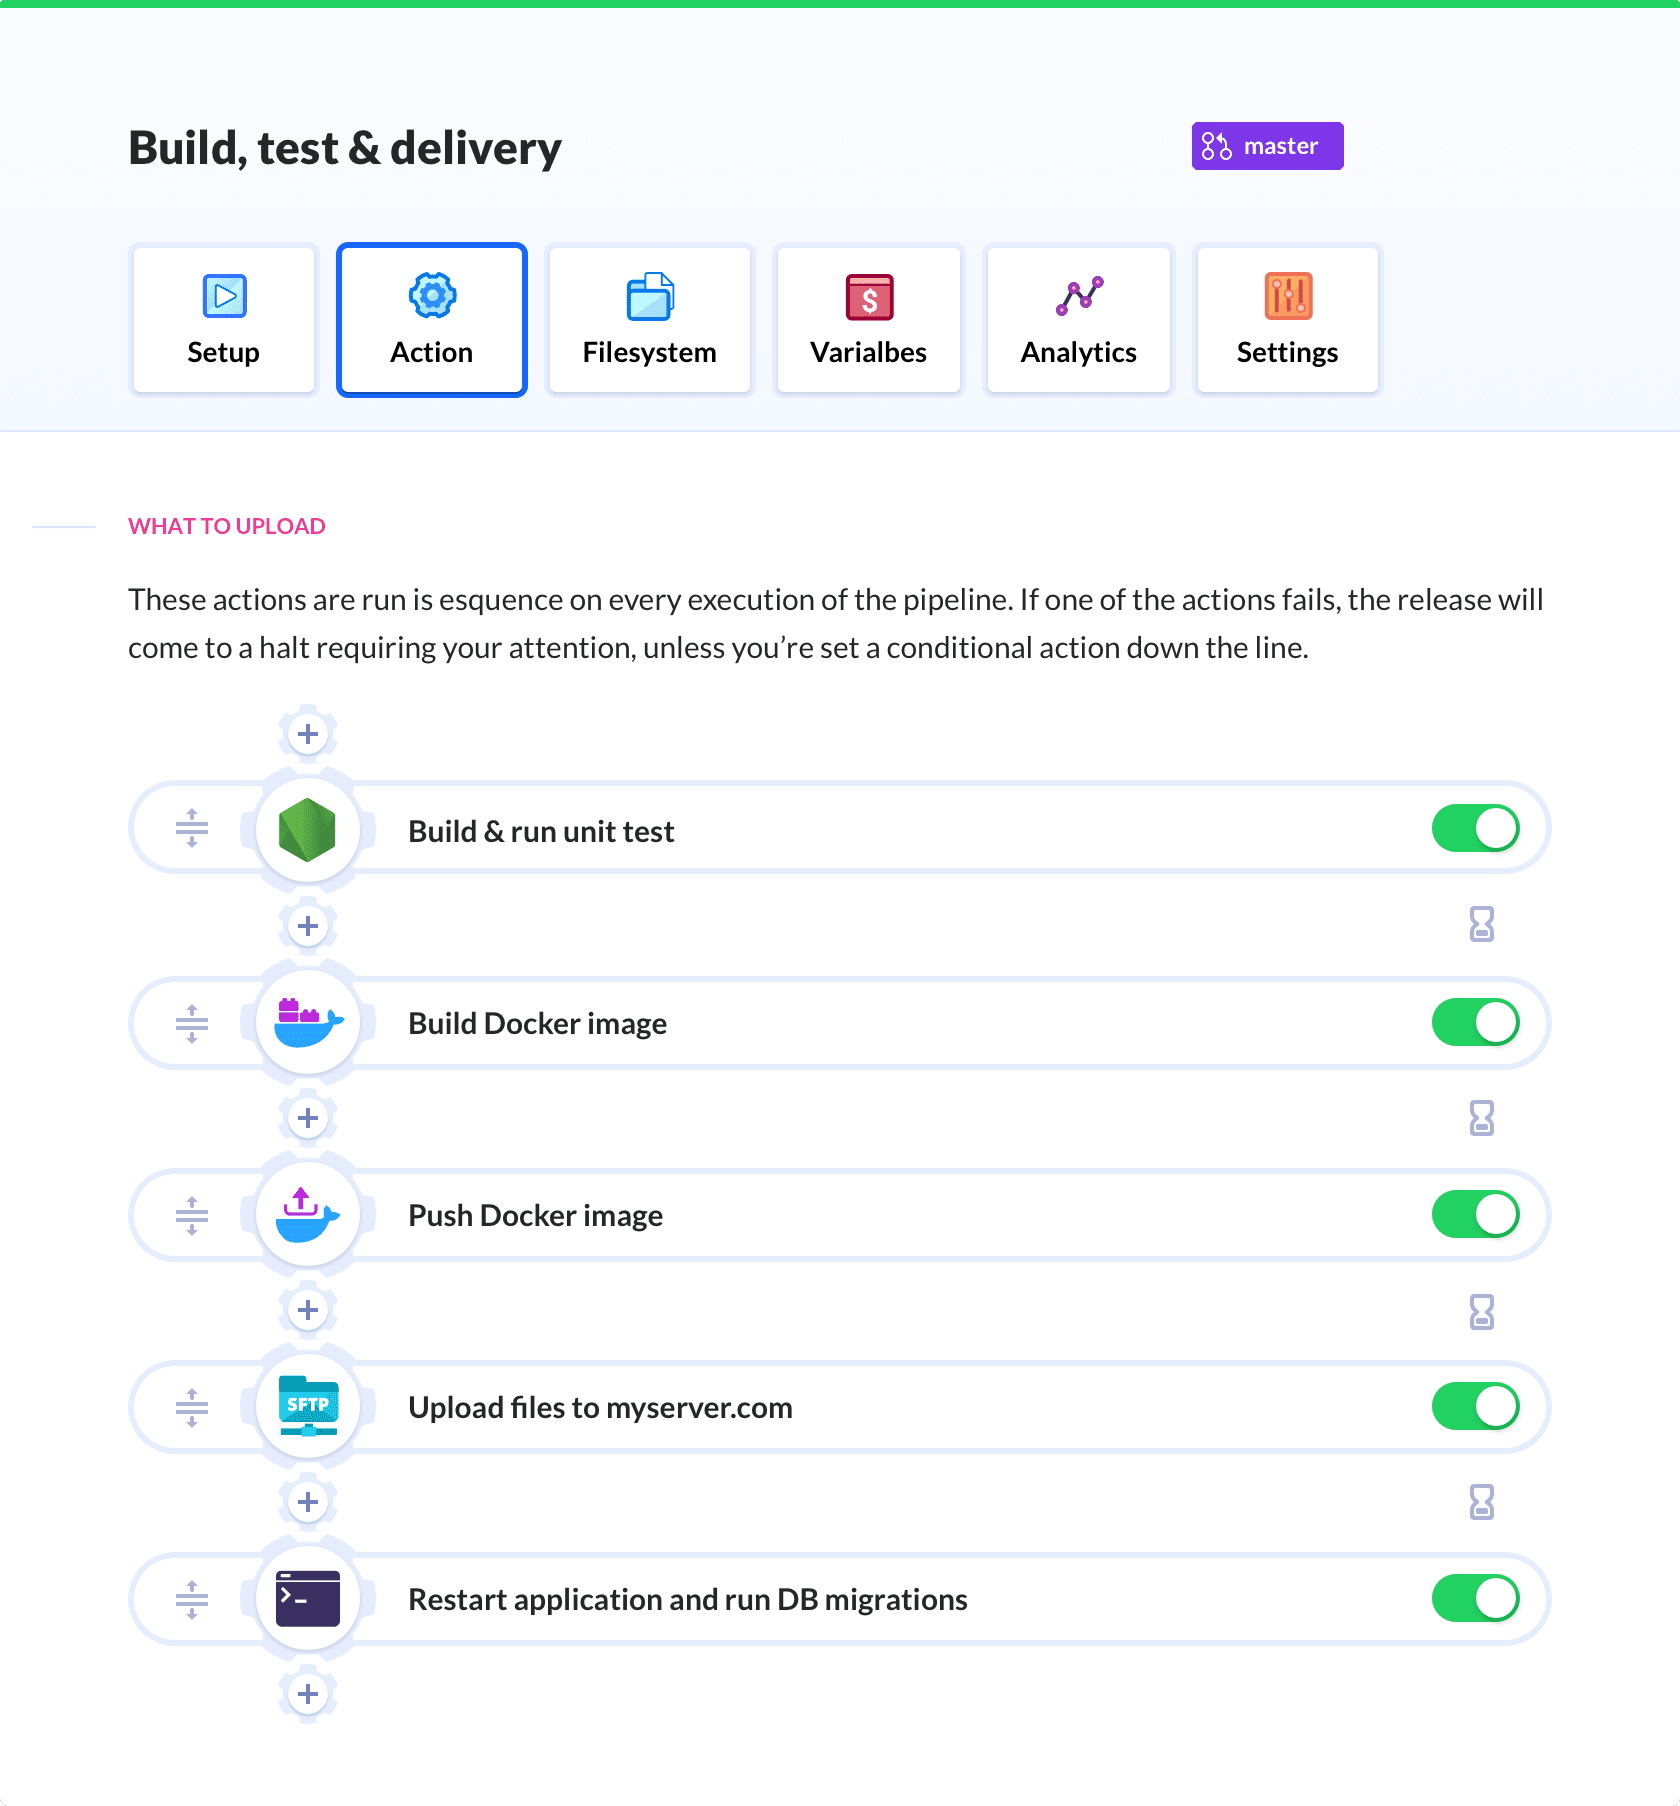 Screenshot of actions in build and delivery processes in Buddy